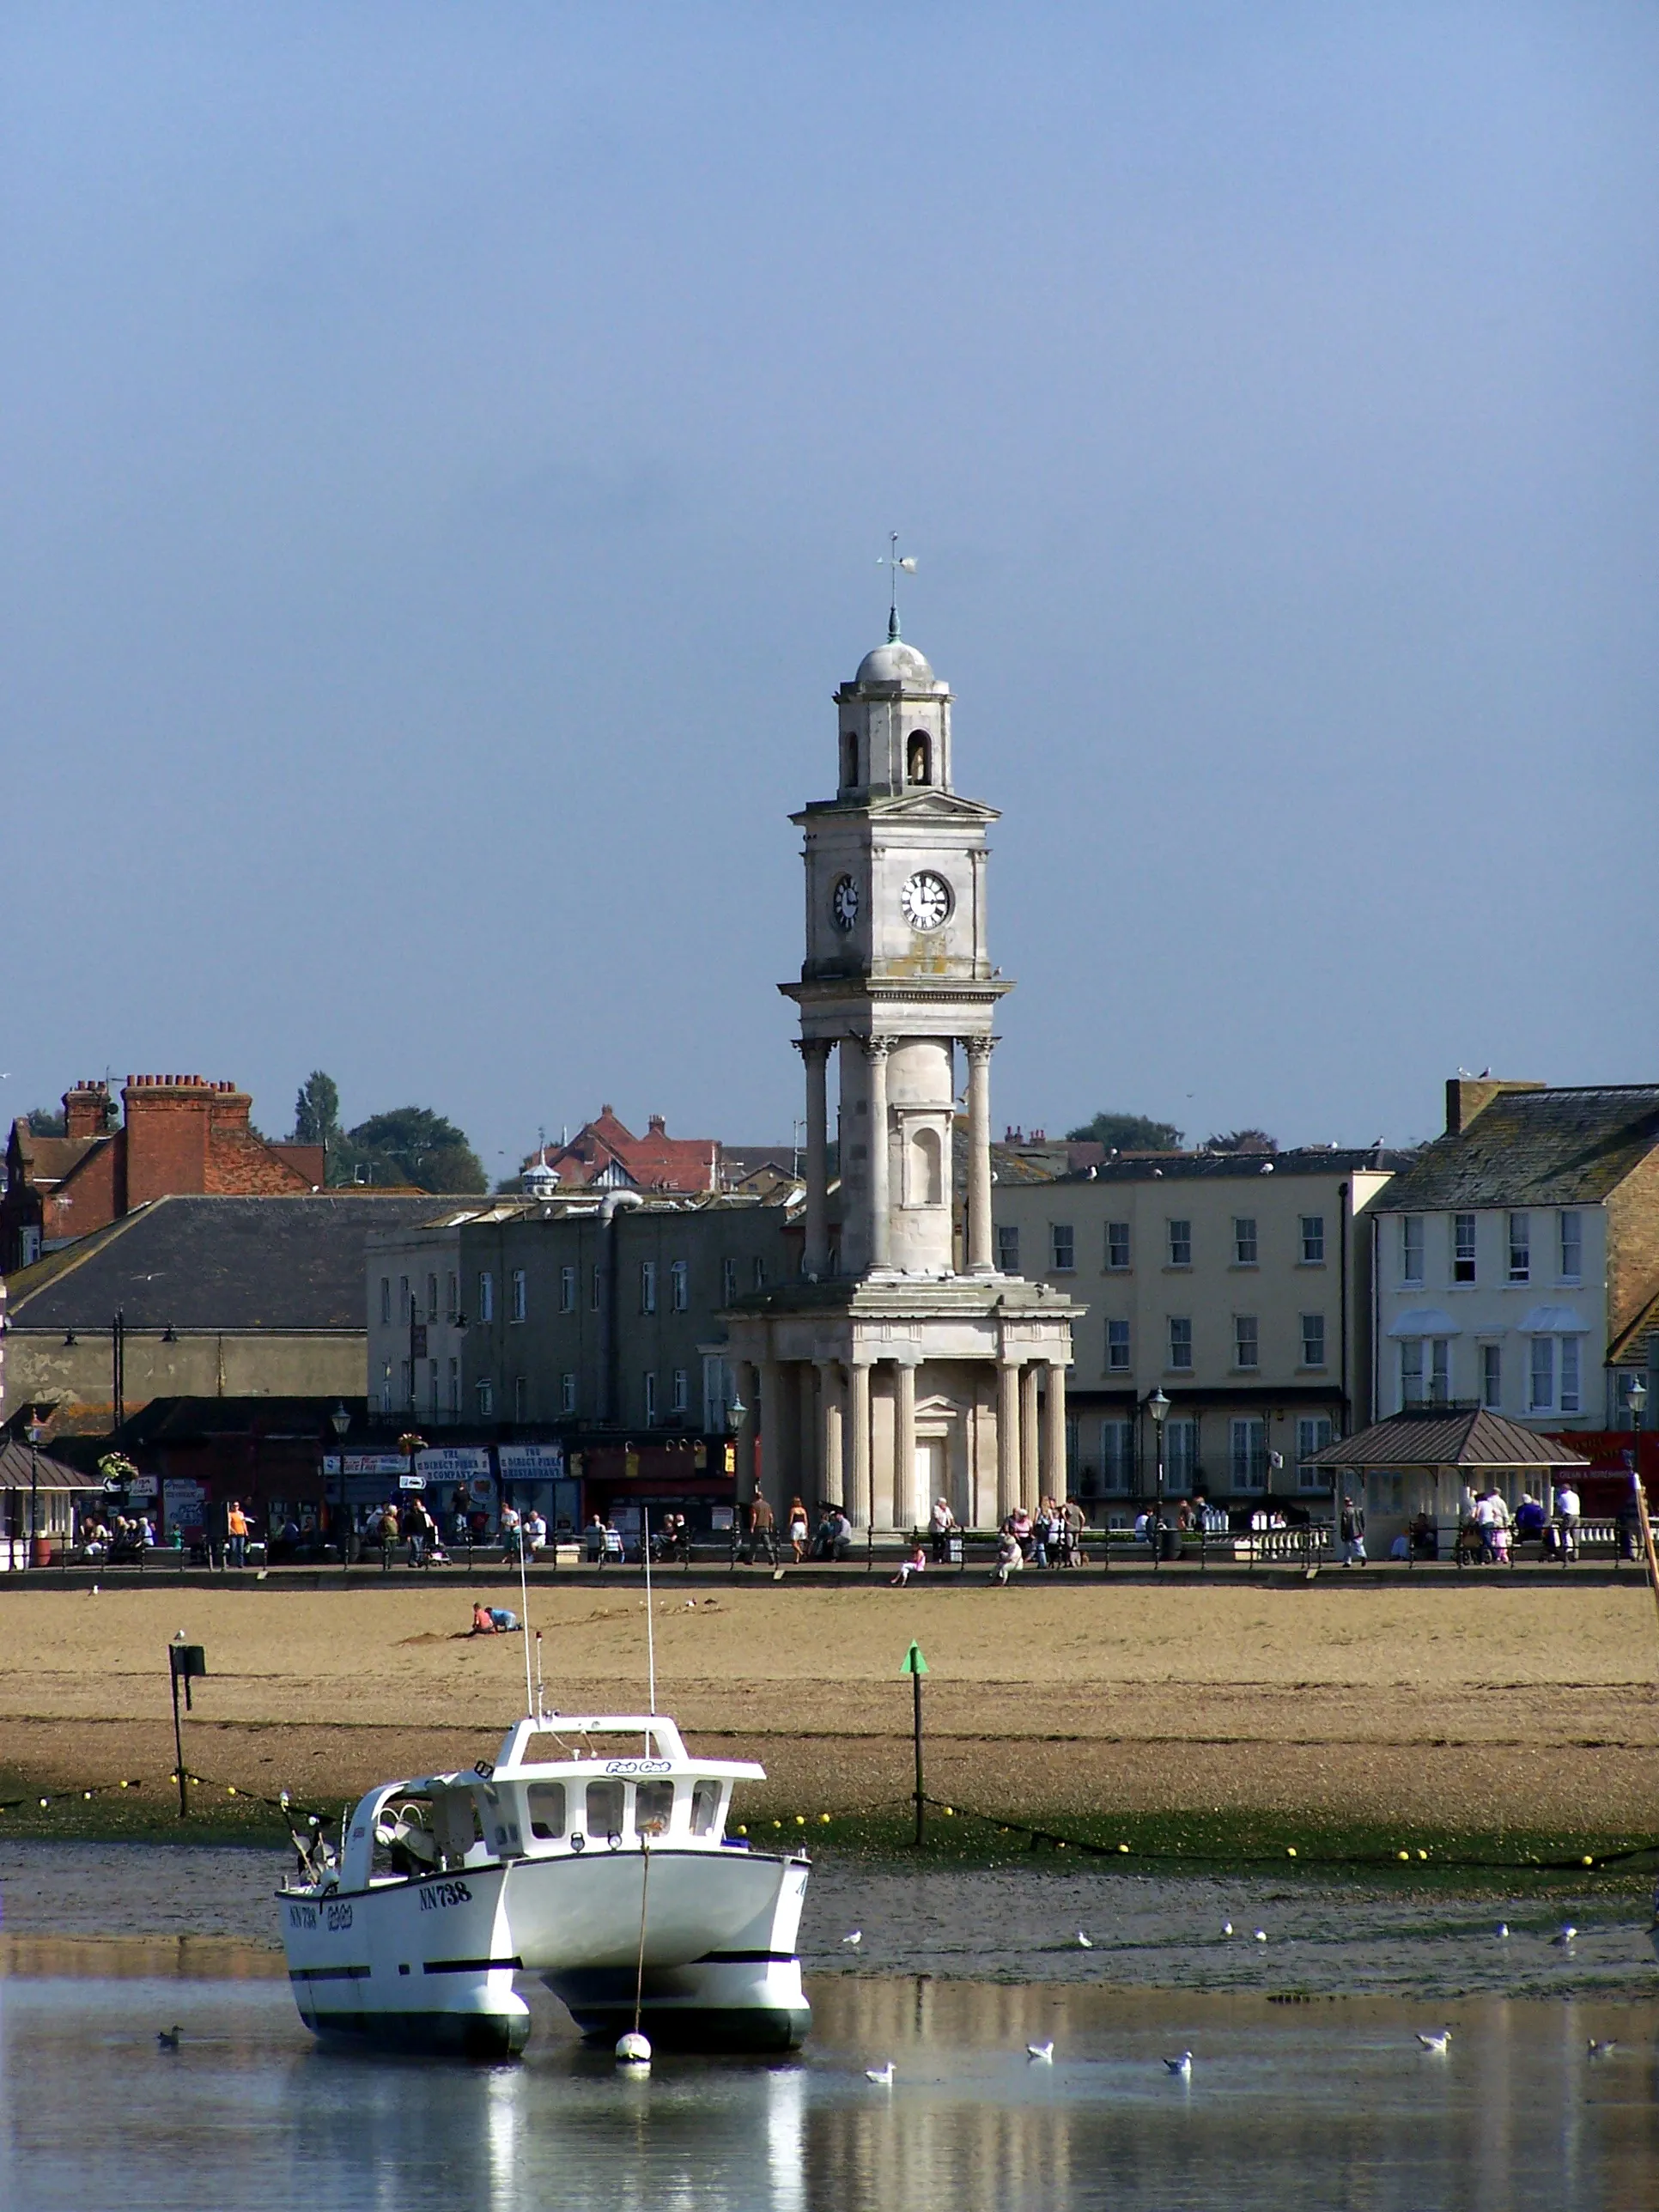 Photo showing: Herne Bay, Herne, Kent, England showing the clock tower and sea front.